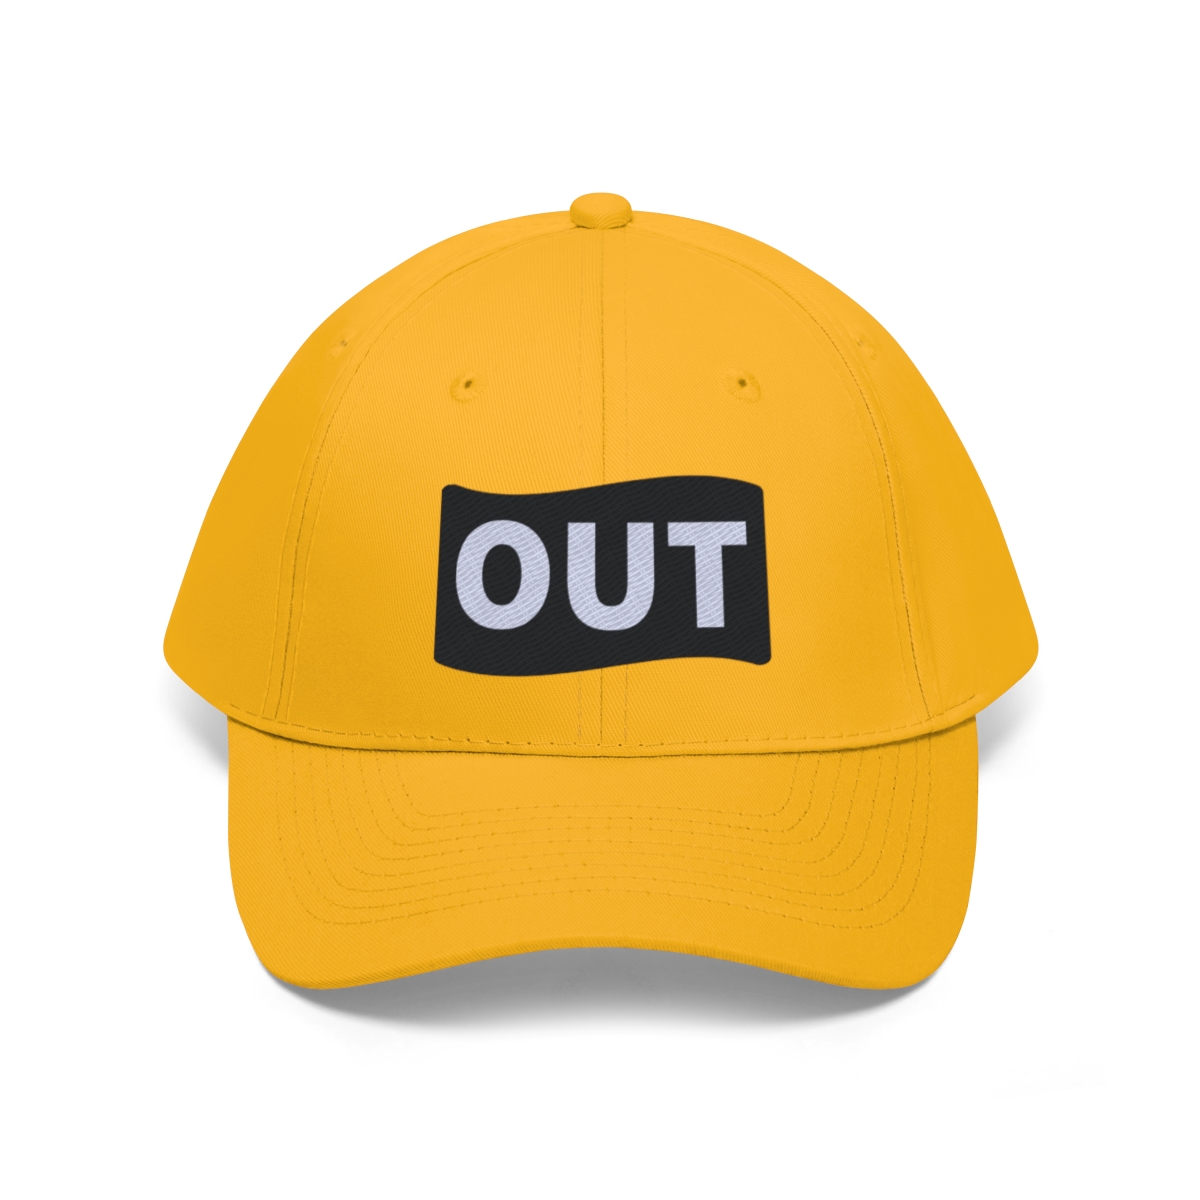 Embroidered Velcro Cap product thumbnail image